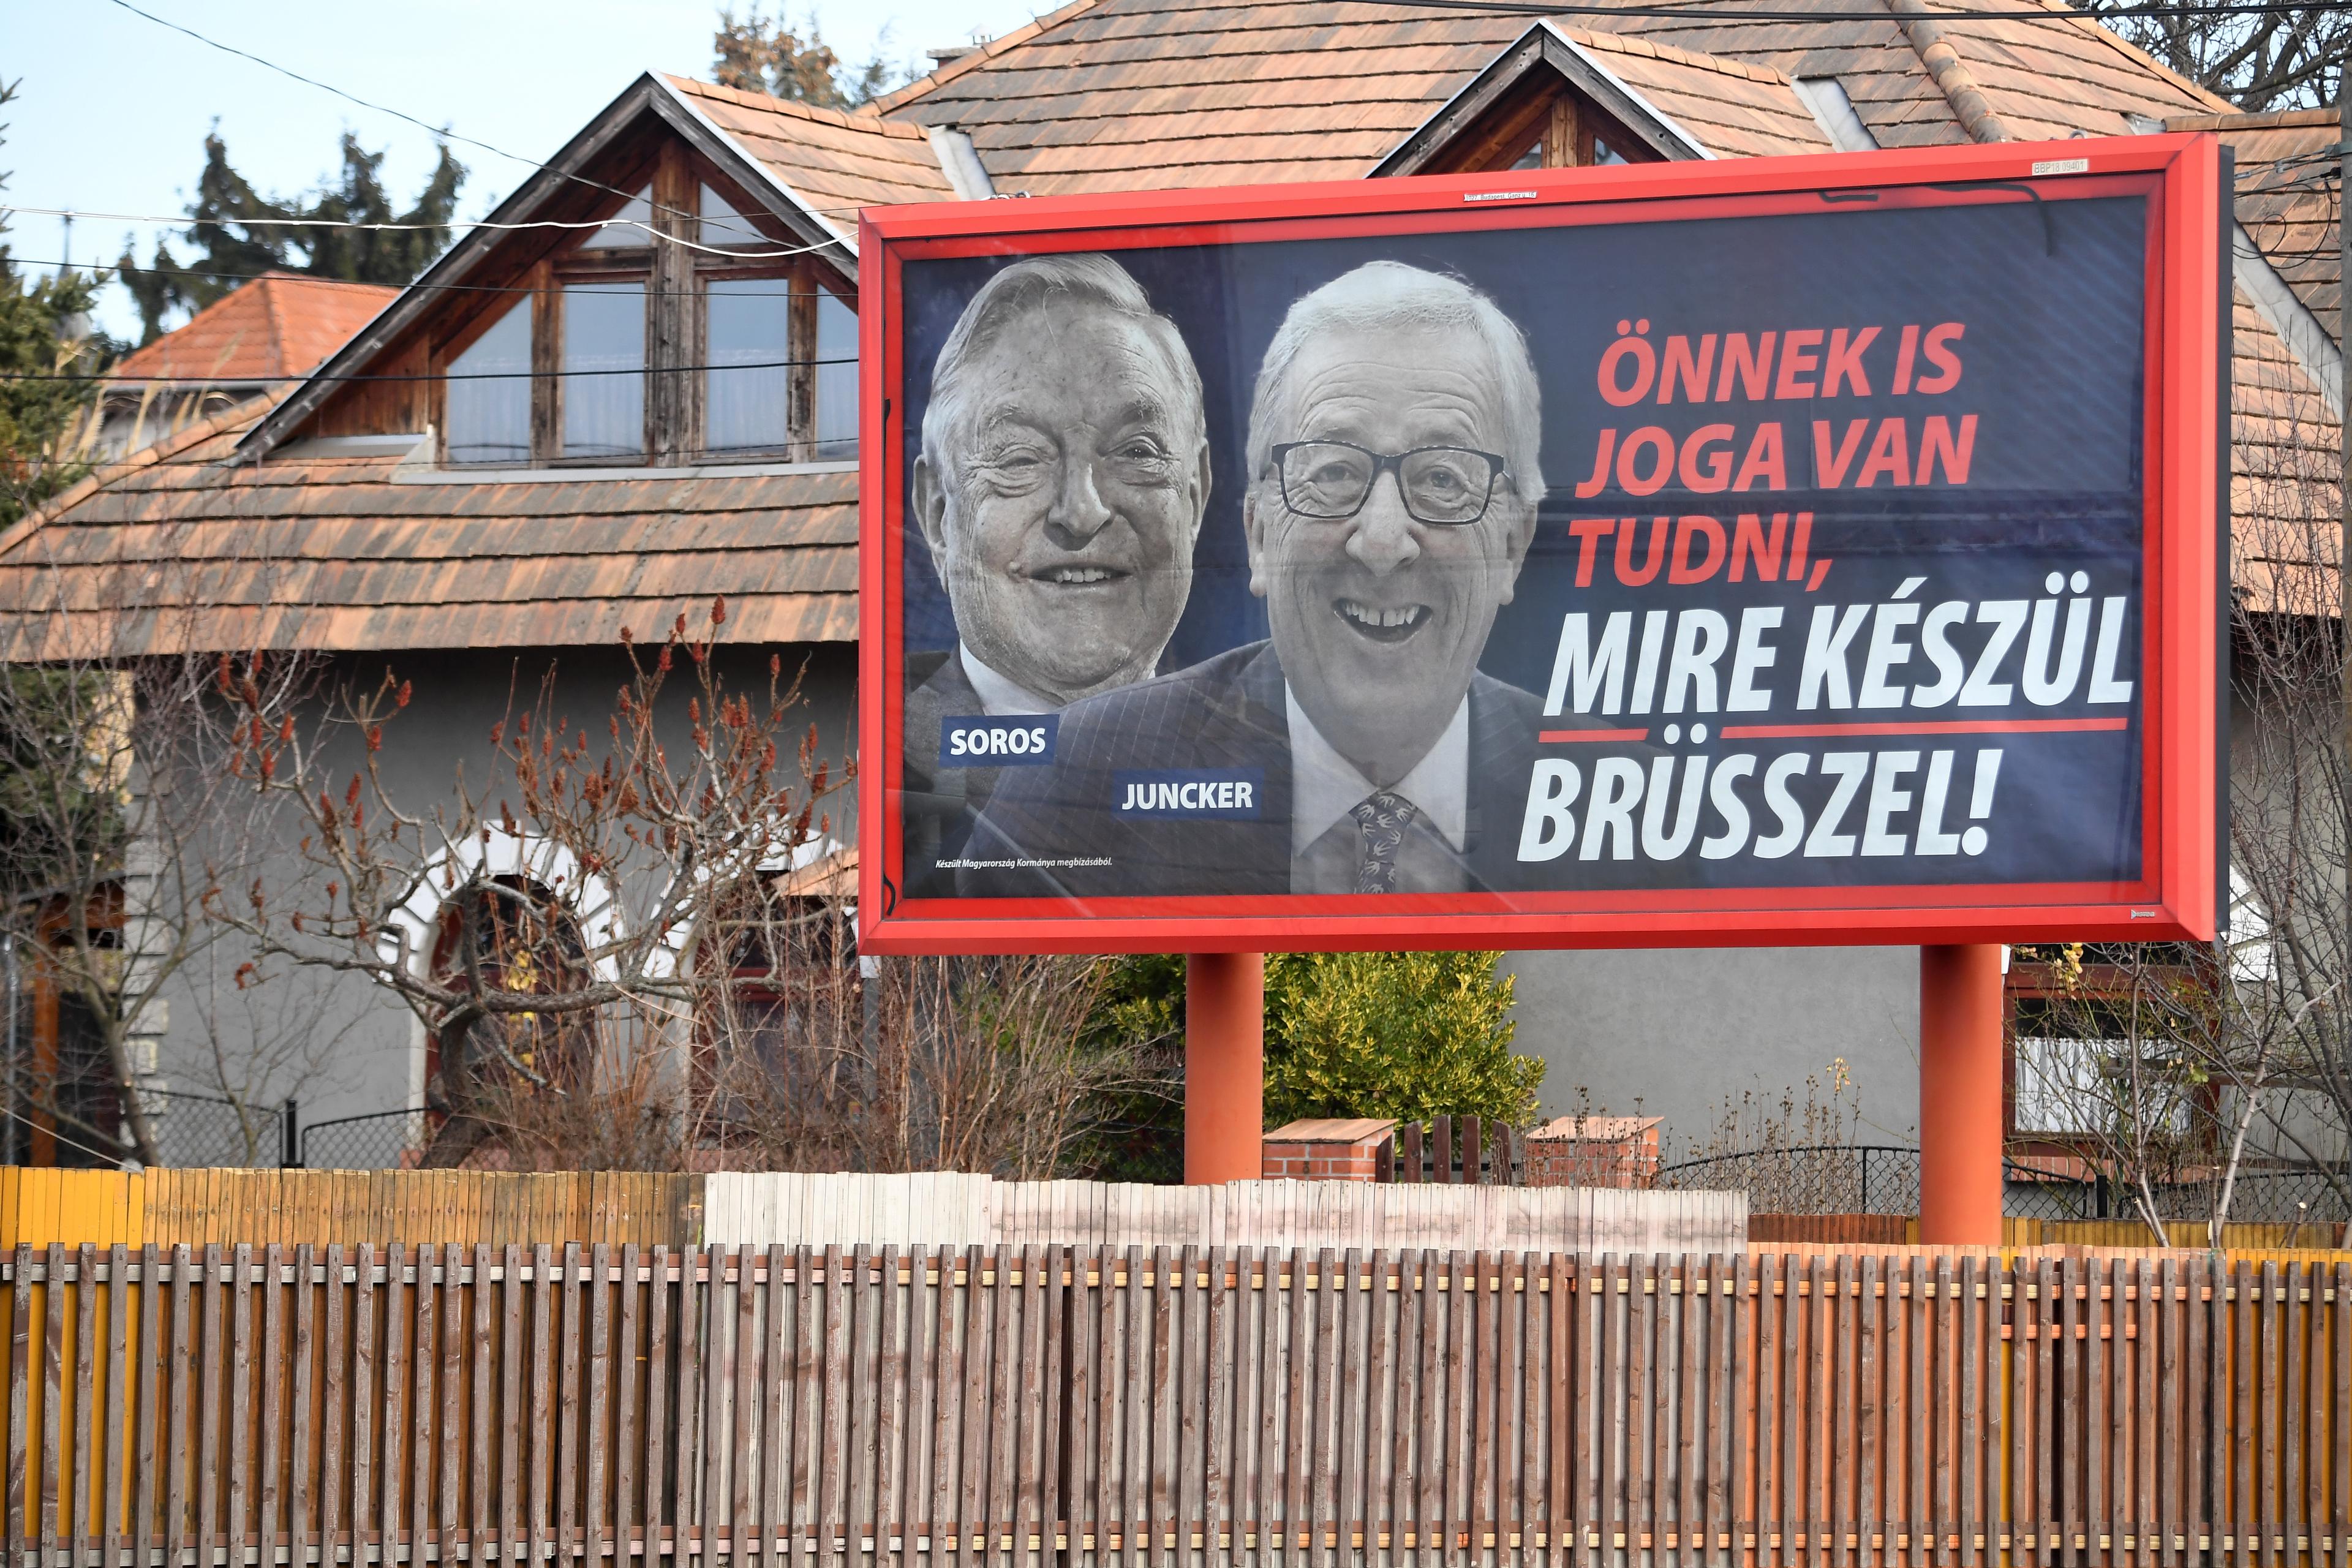 A picture taken on February 26, 2019 in Budapest shows a billboard bearing portraits of European Commission chief Jean-Claude Juncker (R) and Hungarian-born US investor and philanthropist George Soros and a slogan reading "You too have a right to know what Brussels is preparing". - Opposition activists in Hungary on February 25, 2019 defaced hundreds of posters put up by the government of nationalist Prime Minister Viktor Orban attacking European Commission chief Jean-Claude Juncker and billionaire George Soros. (Photo by ATTILA KISBENEDEK / AFP)